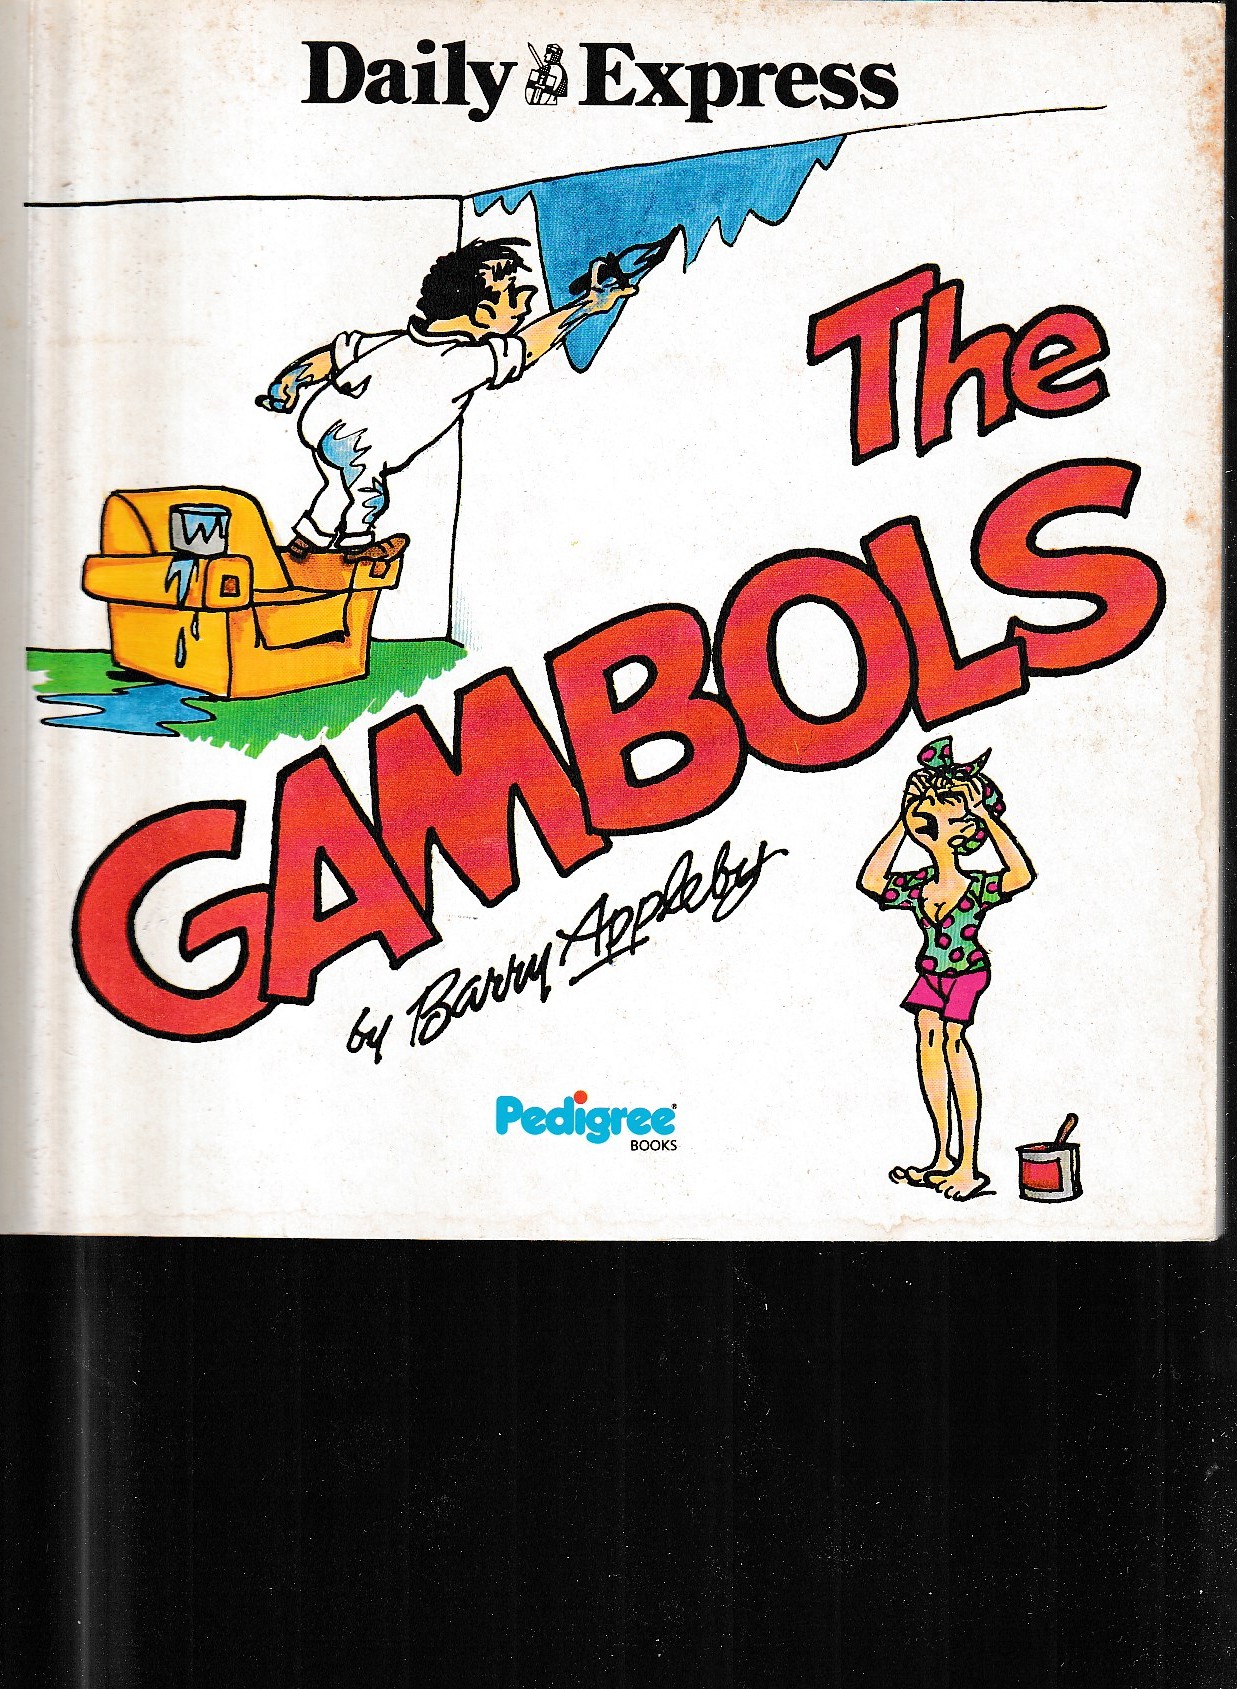 Barry Appleby  THE GAMBOLS 43 front book cover image